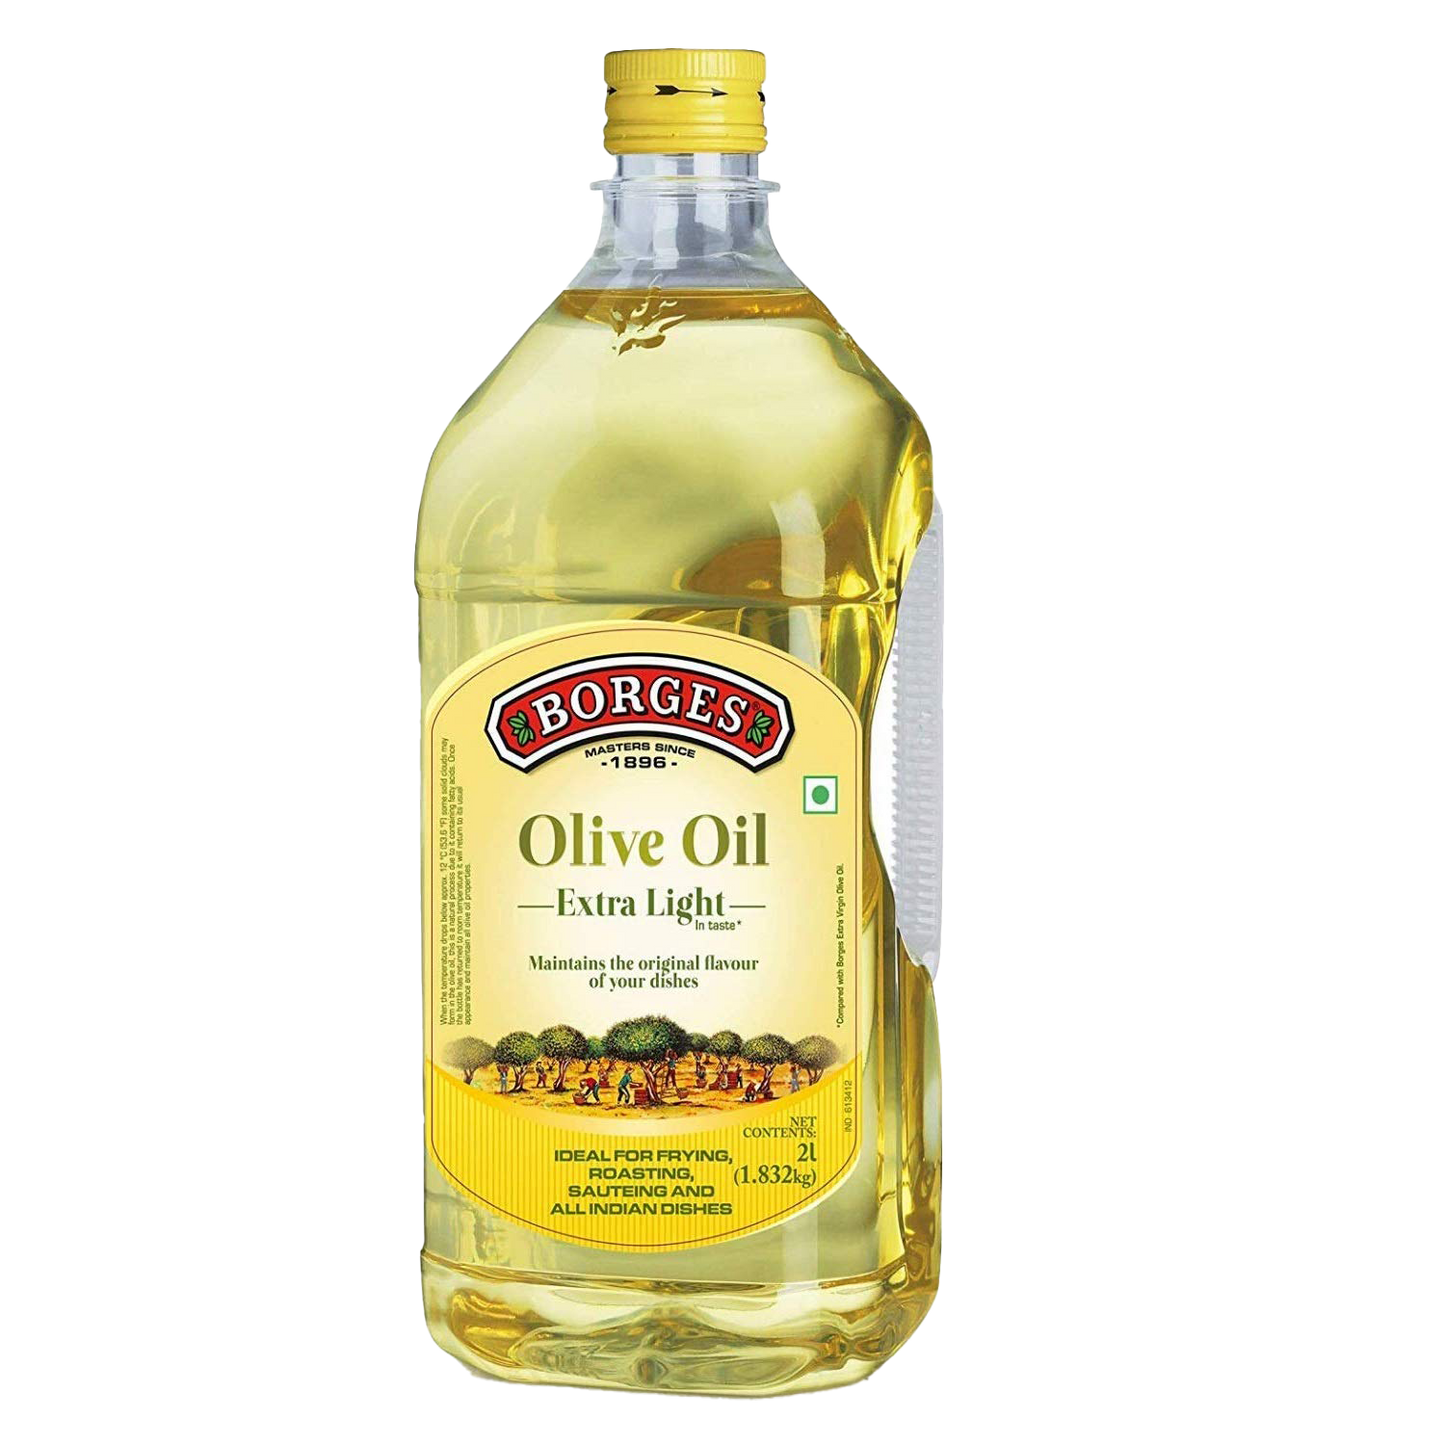 luckysore Imported olive oil Borges extra light 2 Litre